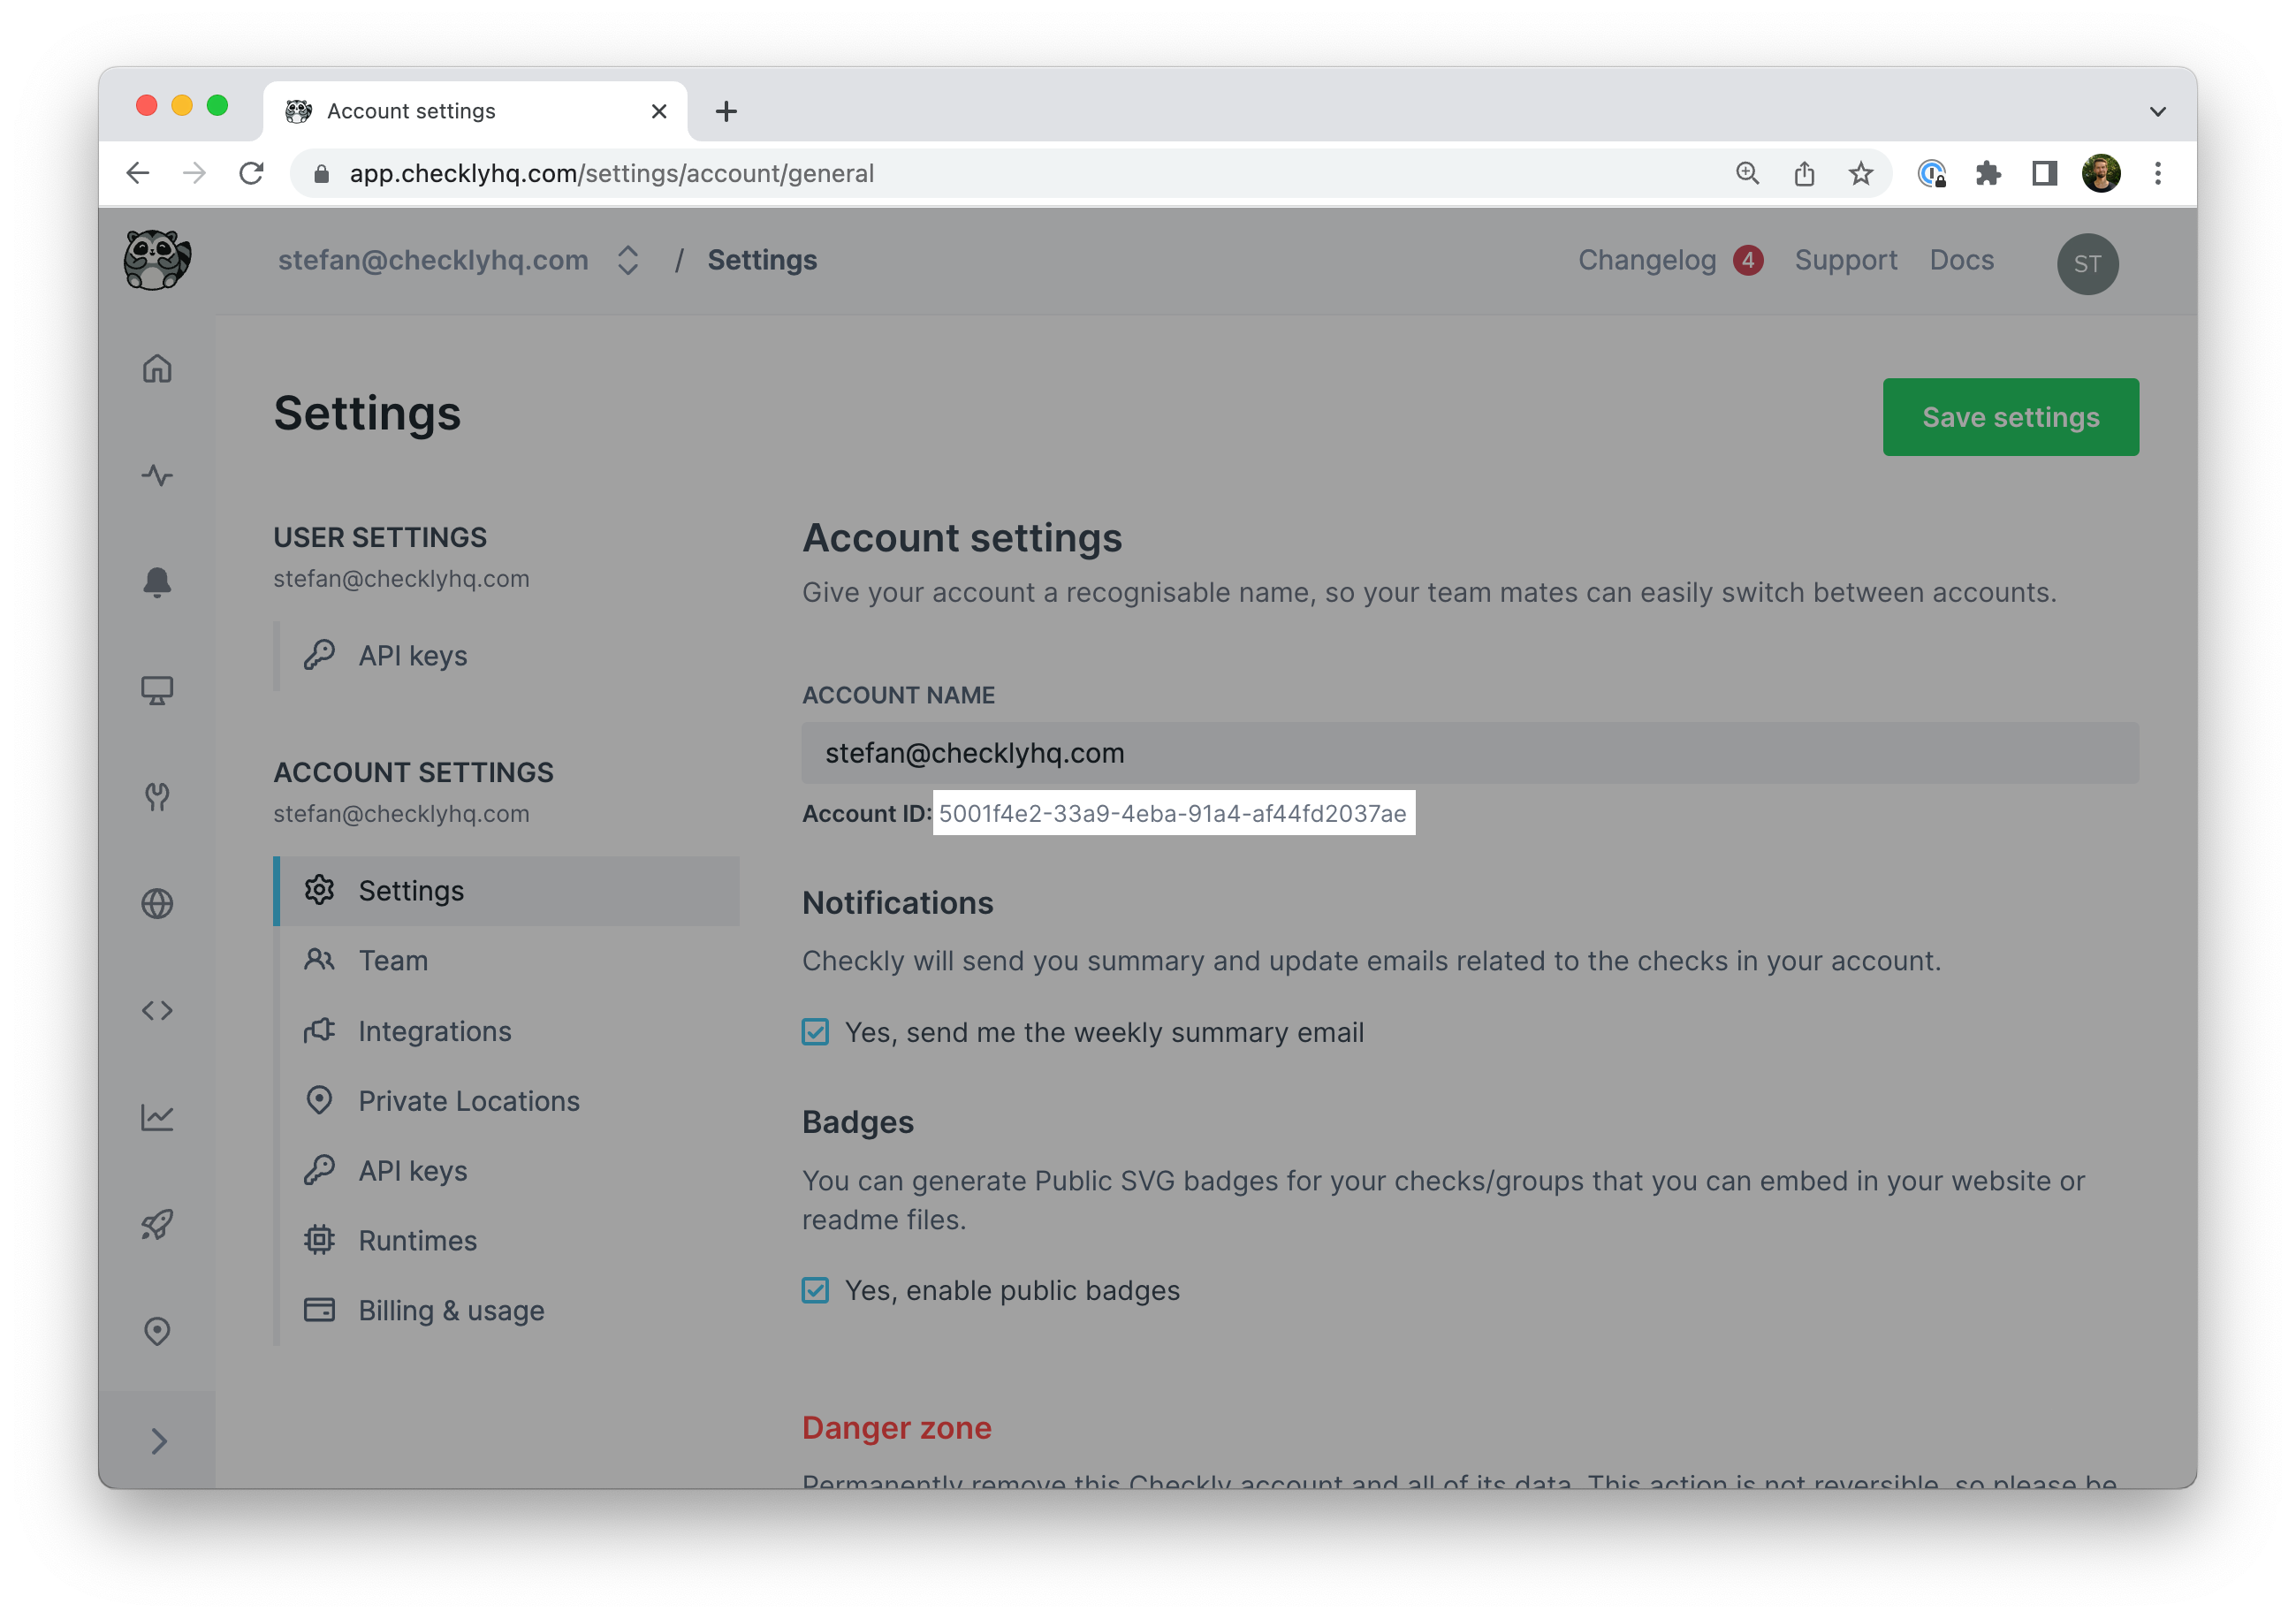 Checkly account settings showing the account ID